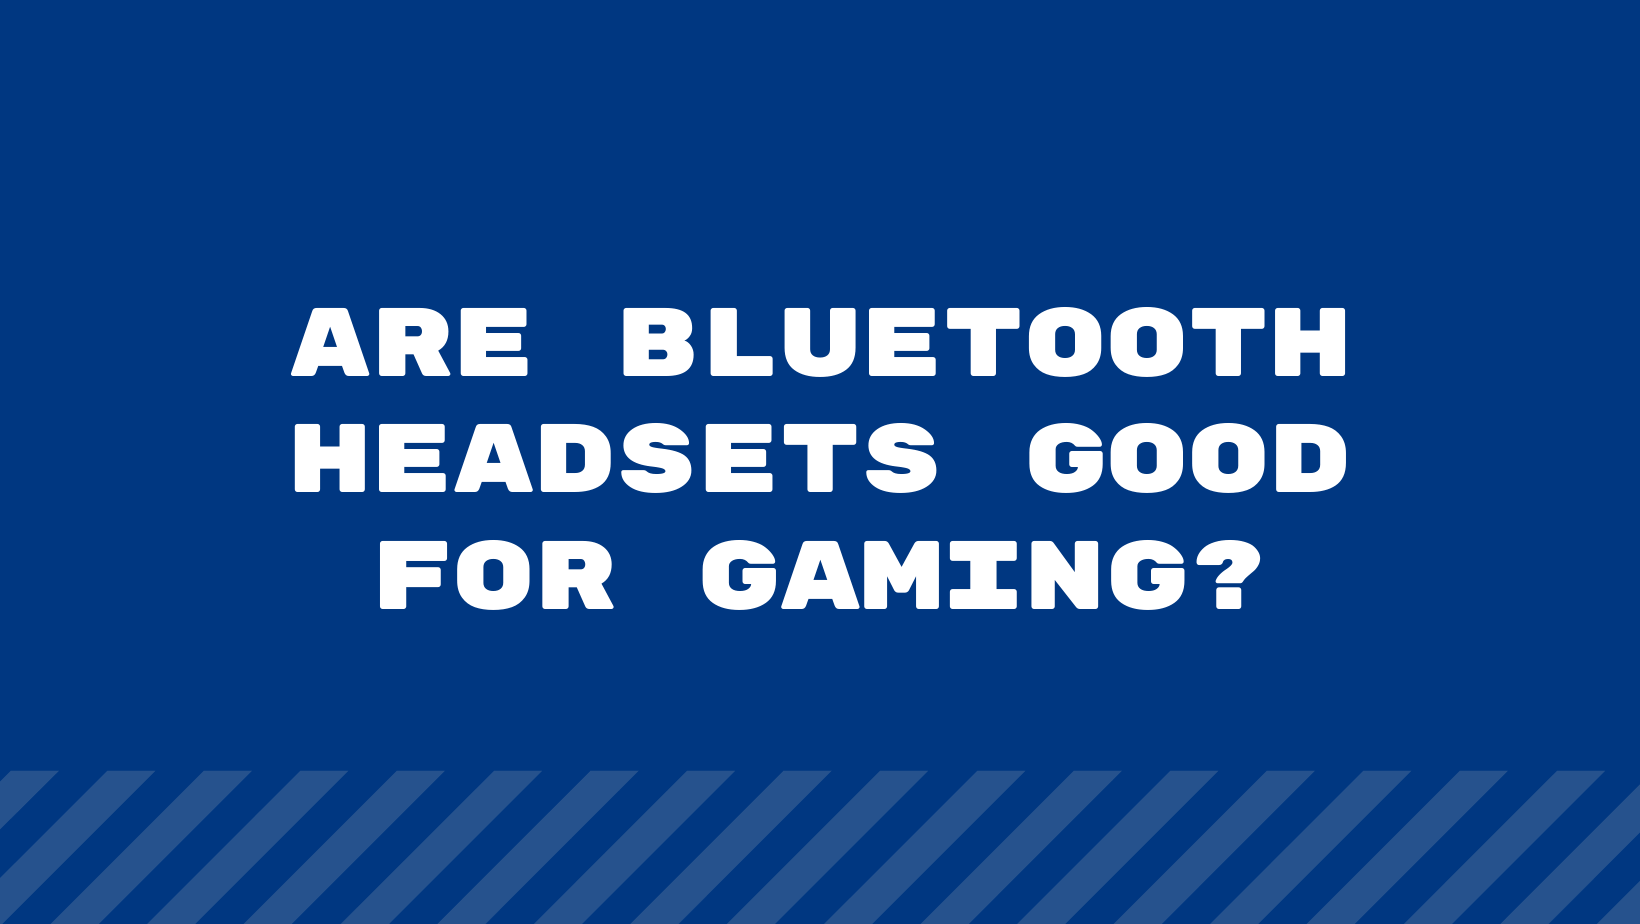 Are Bluetooth Headsets Good for Gaming